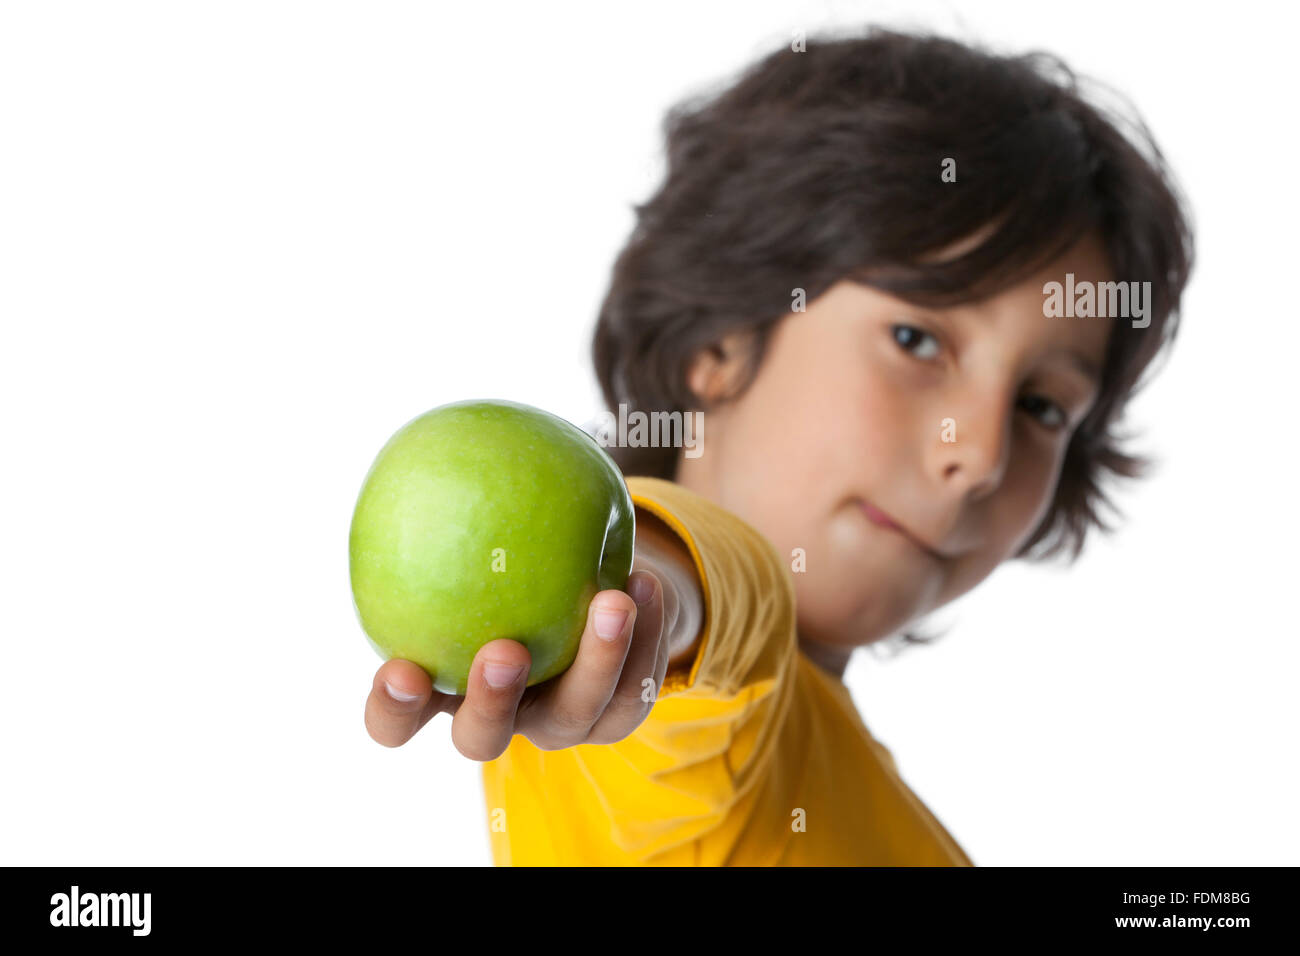 Little boy sticking out a green apple on white background, Stock Photo